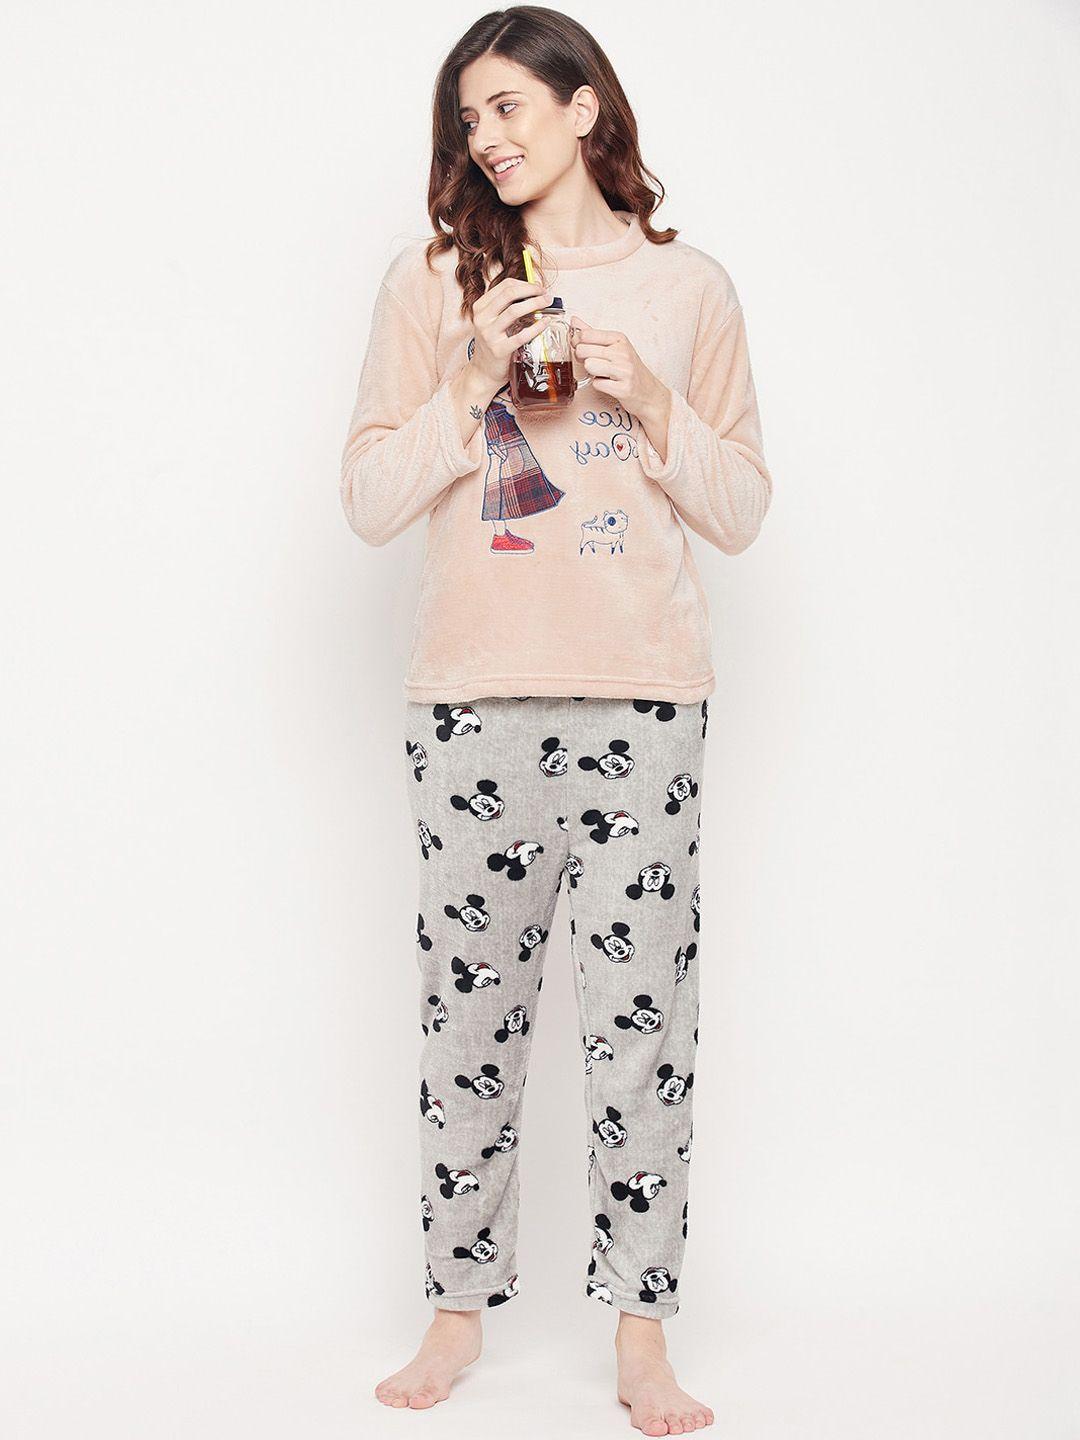 camey-women-printed-night-suit